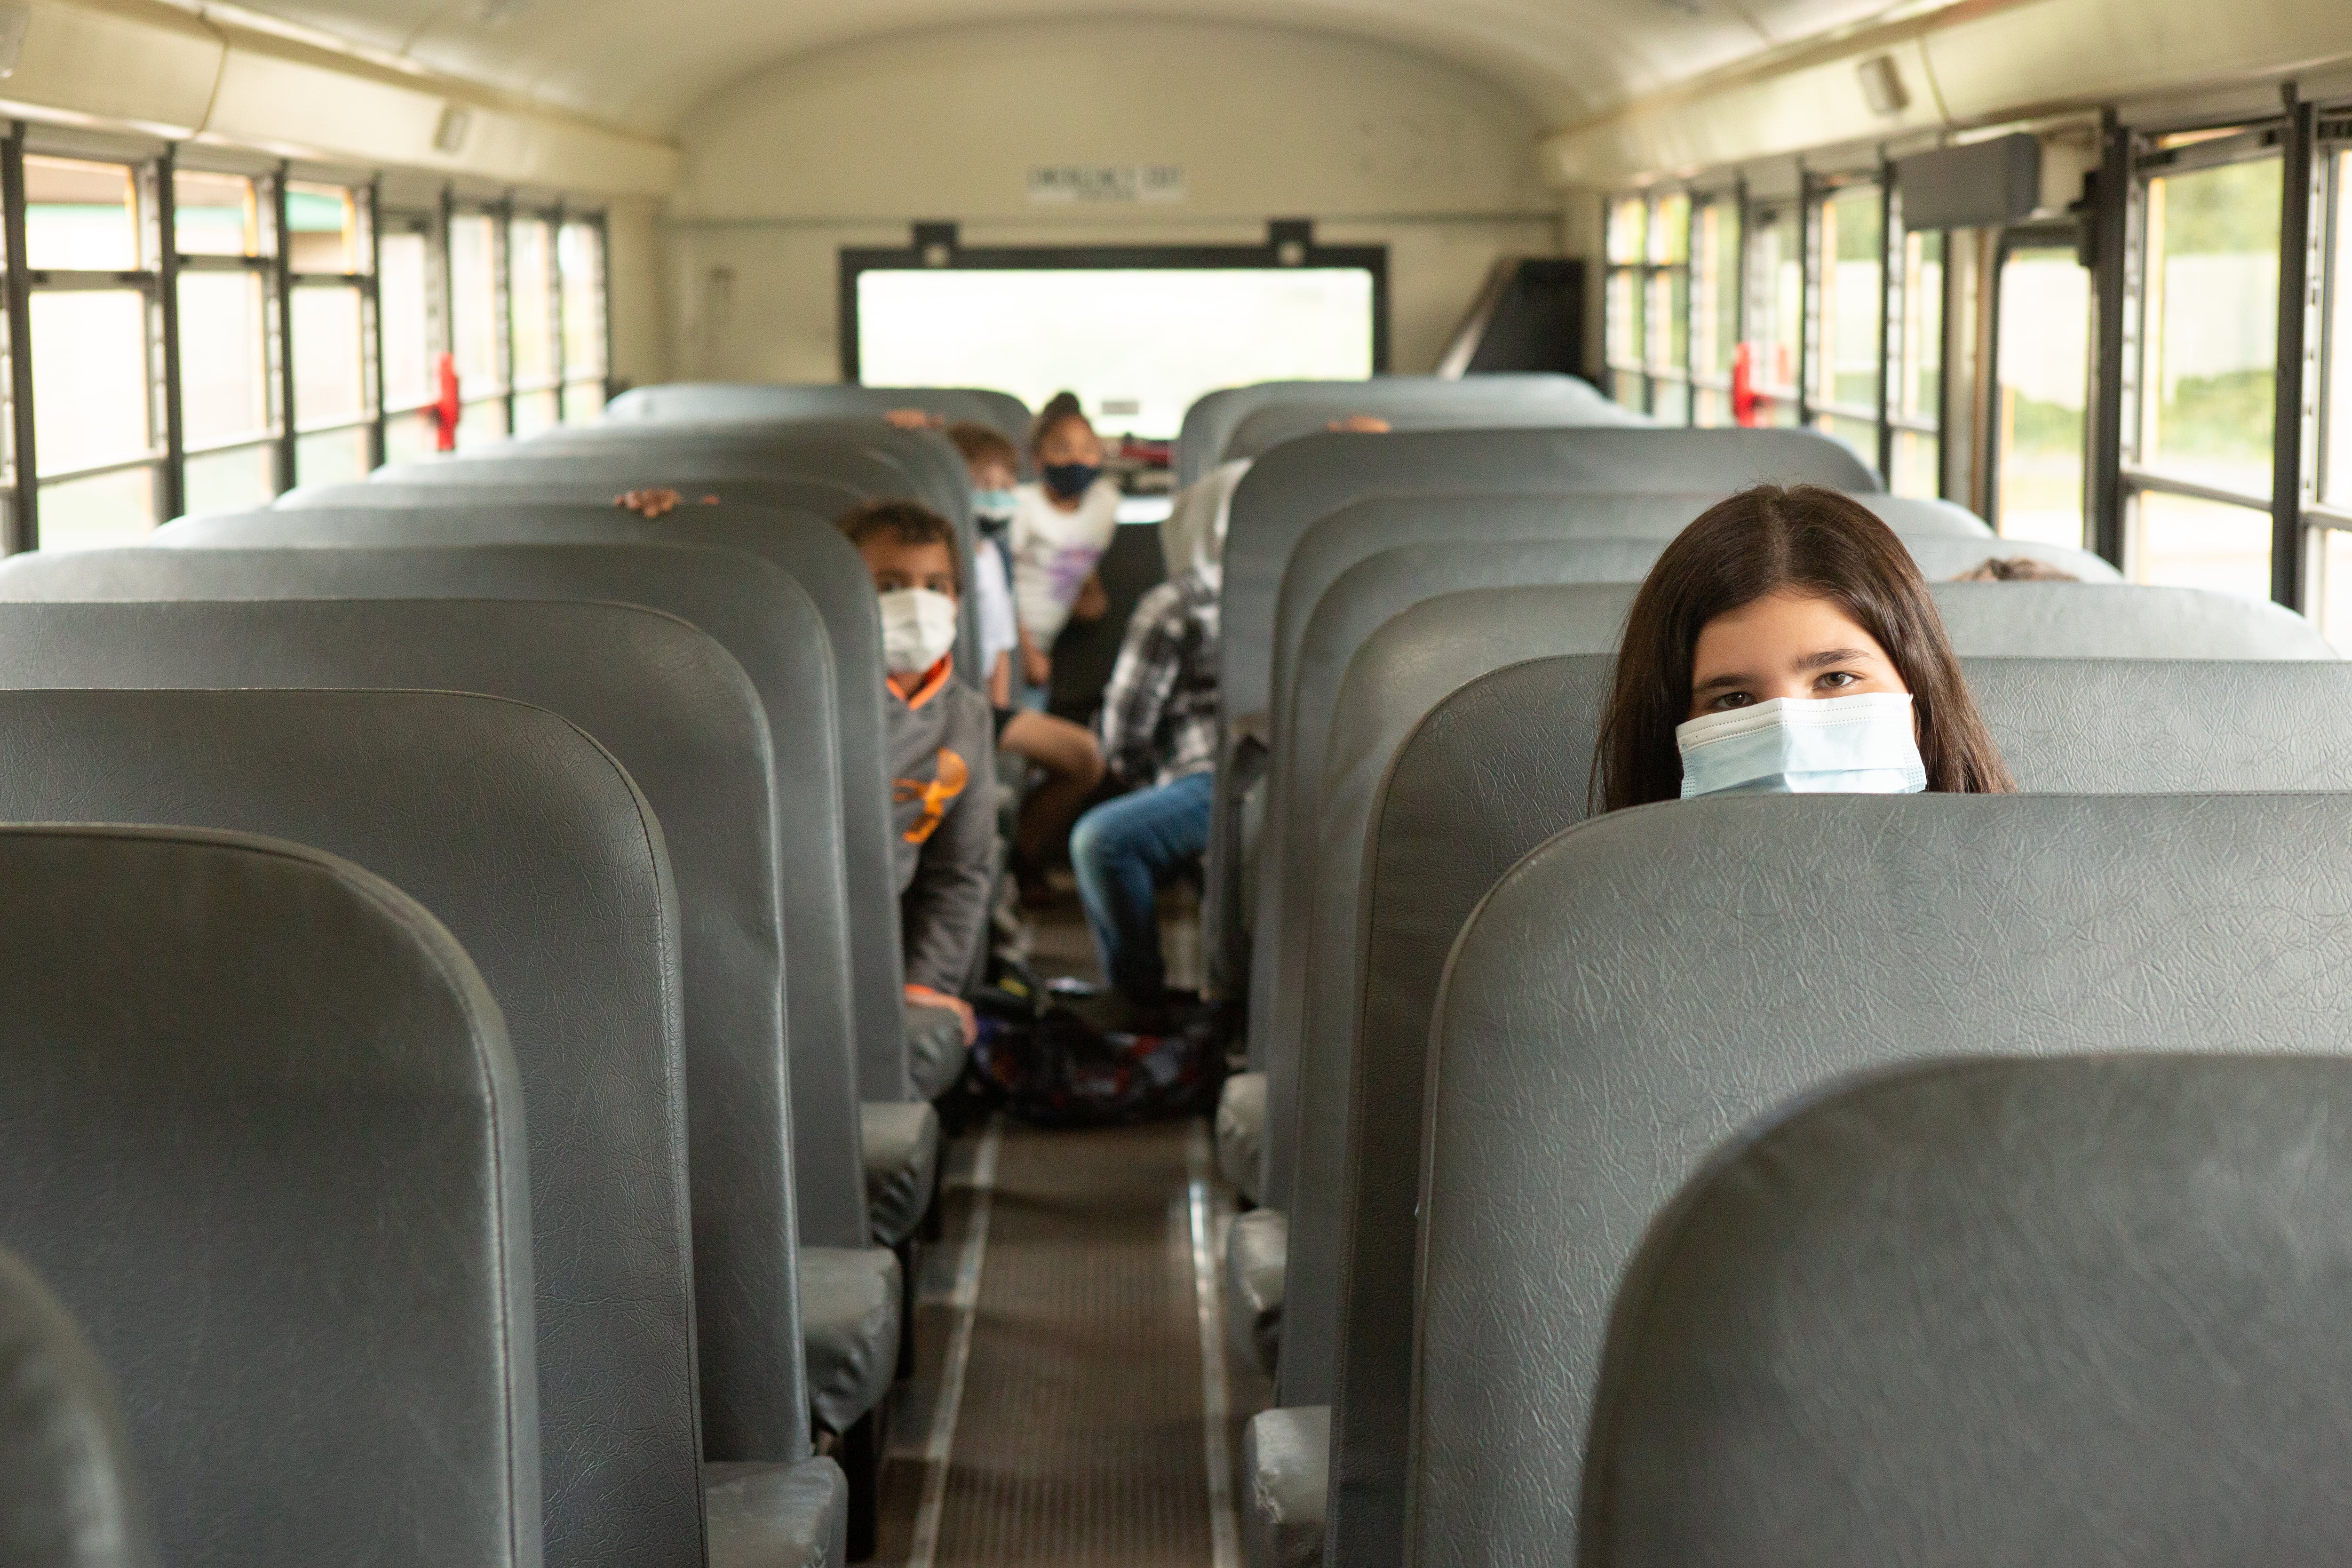 Several students, wearing blue face masks, sit on a bus with gray seats waiting as students wait to depart from school.